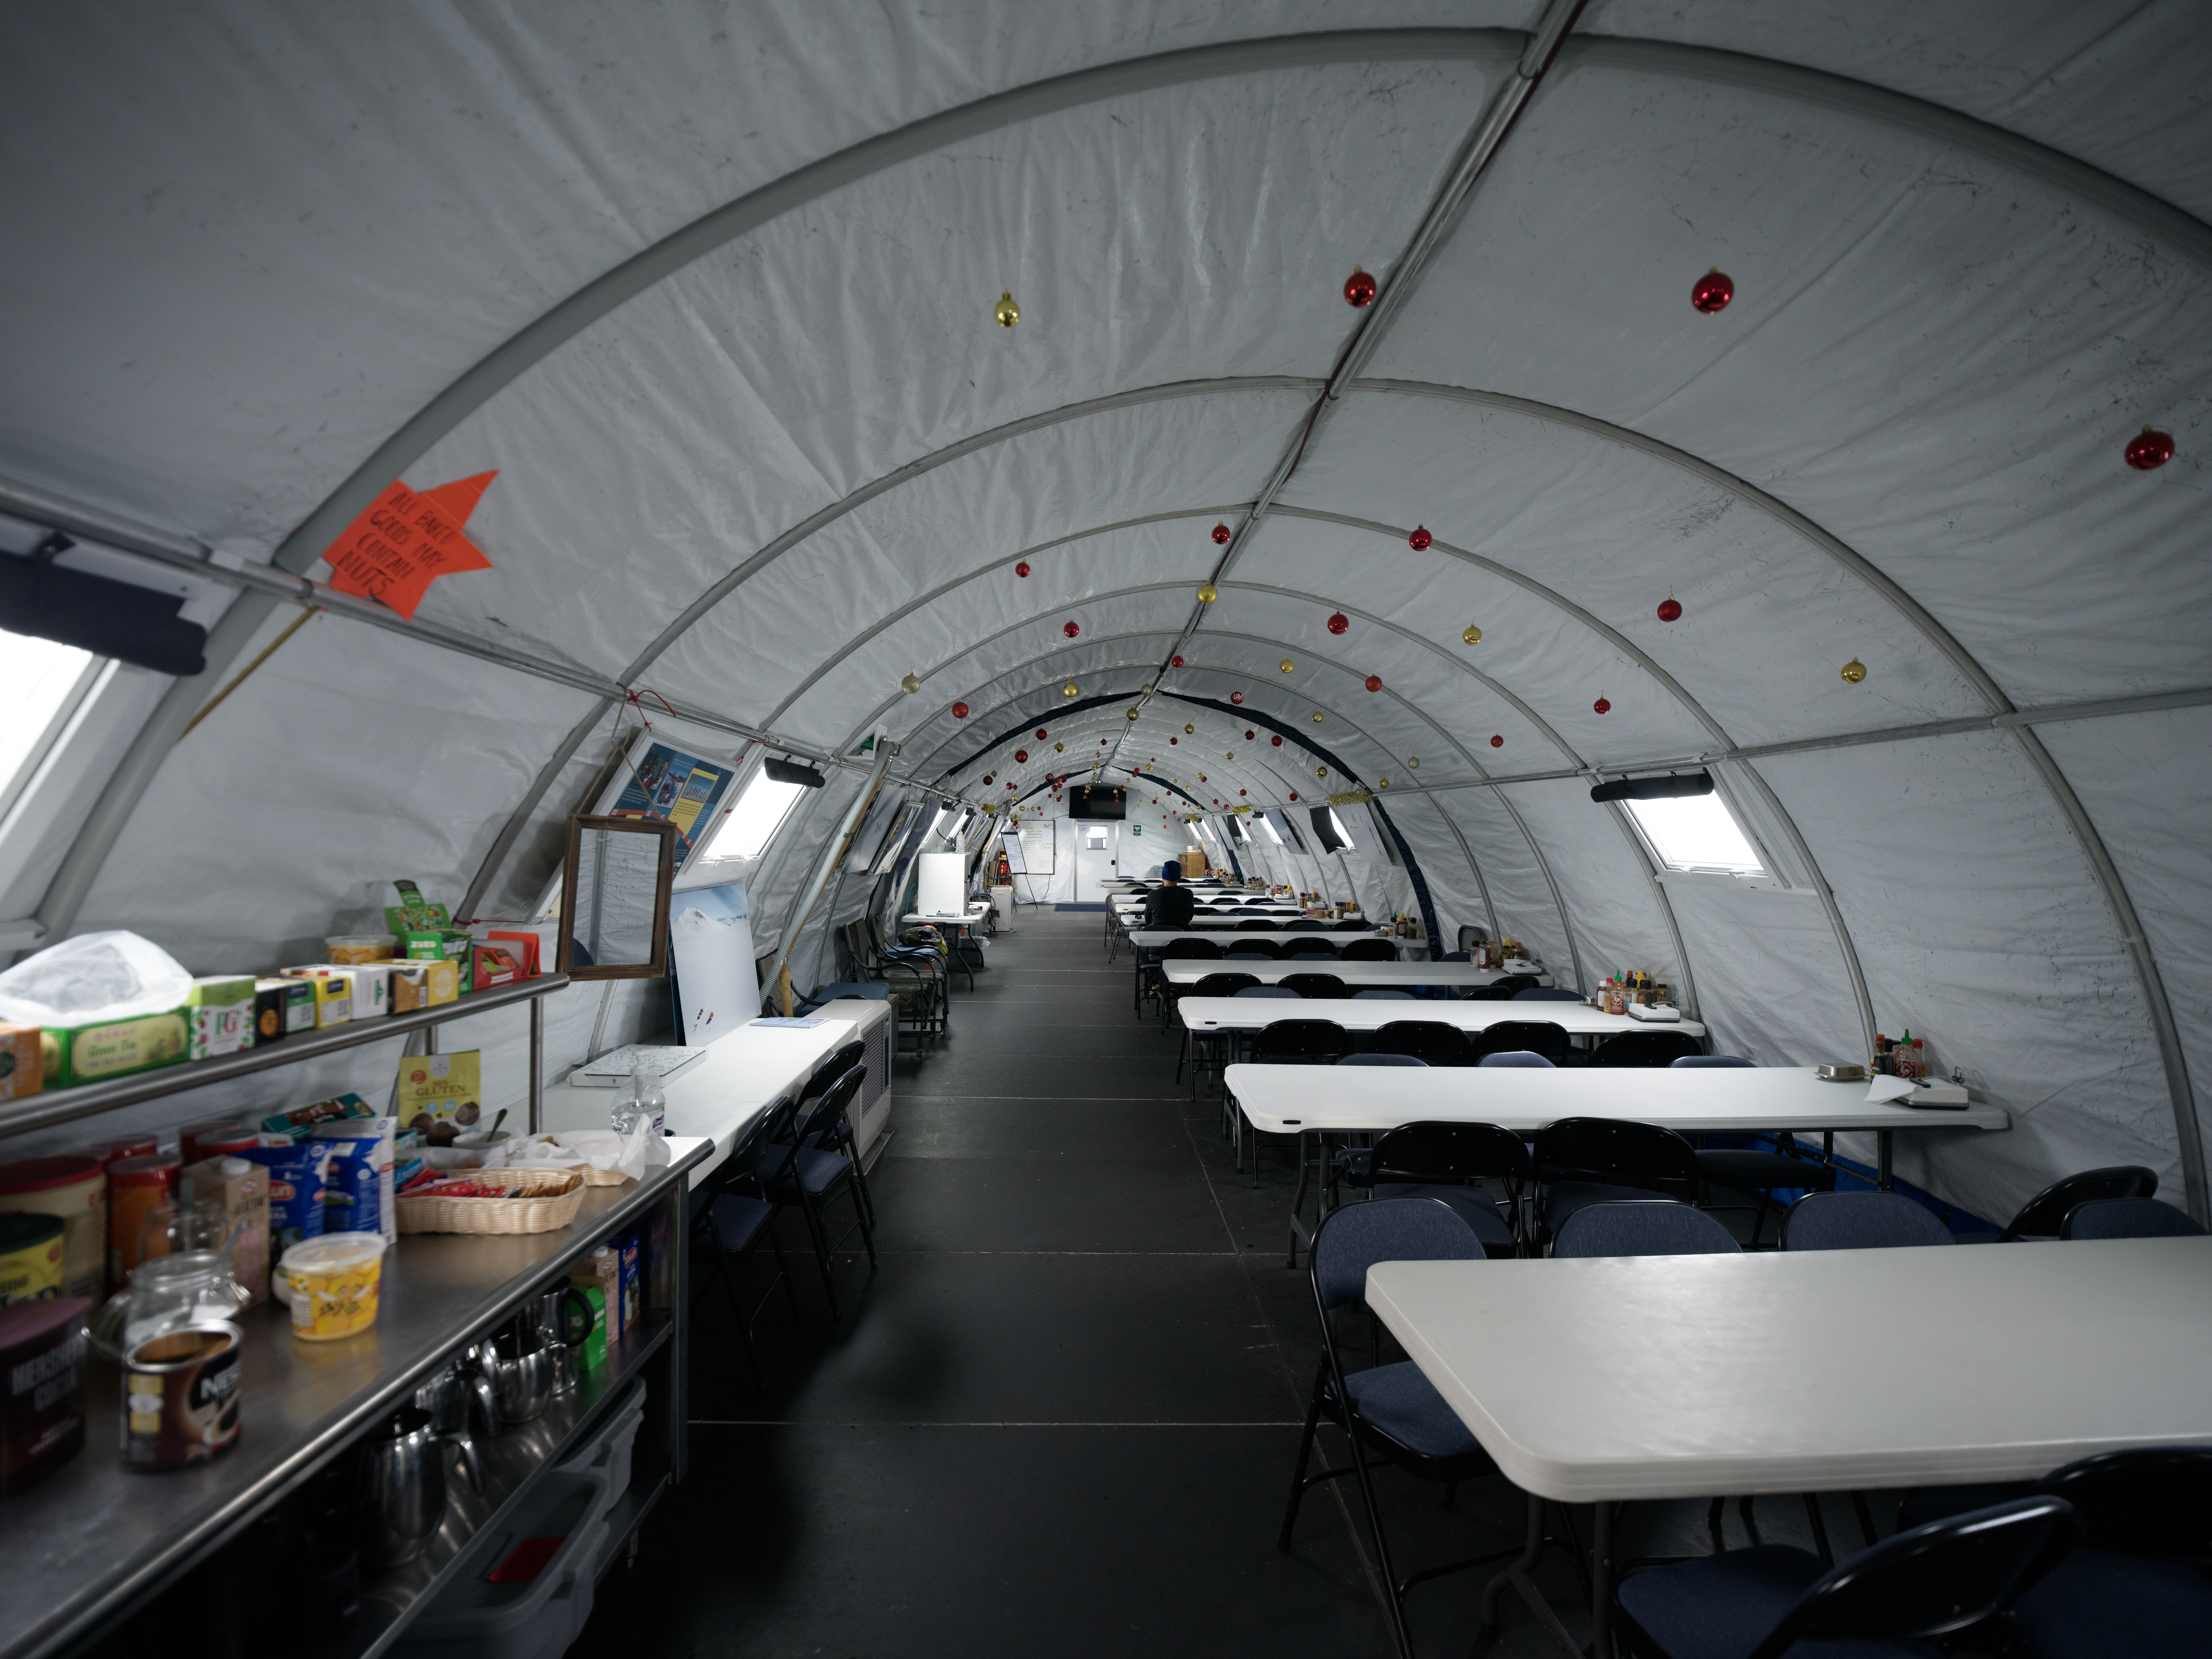 Dining tent with self-serve drink station